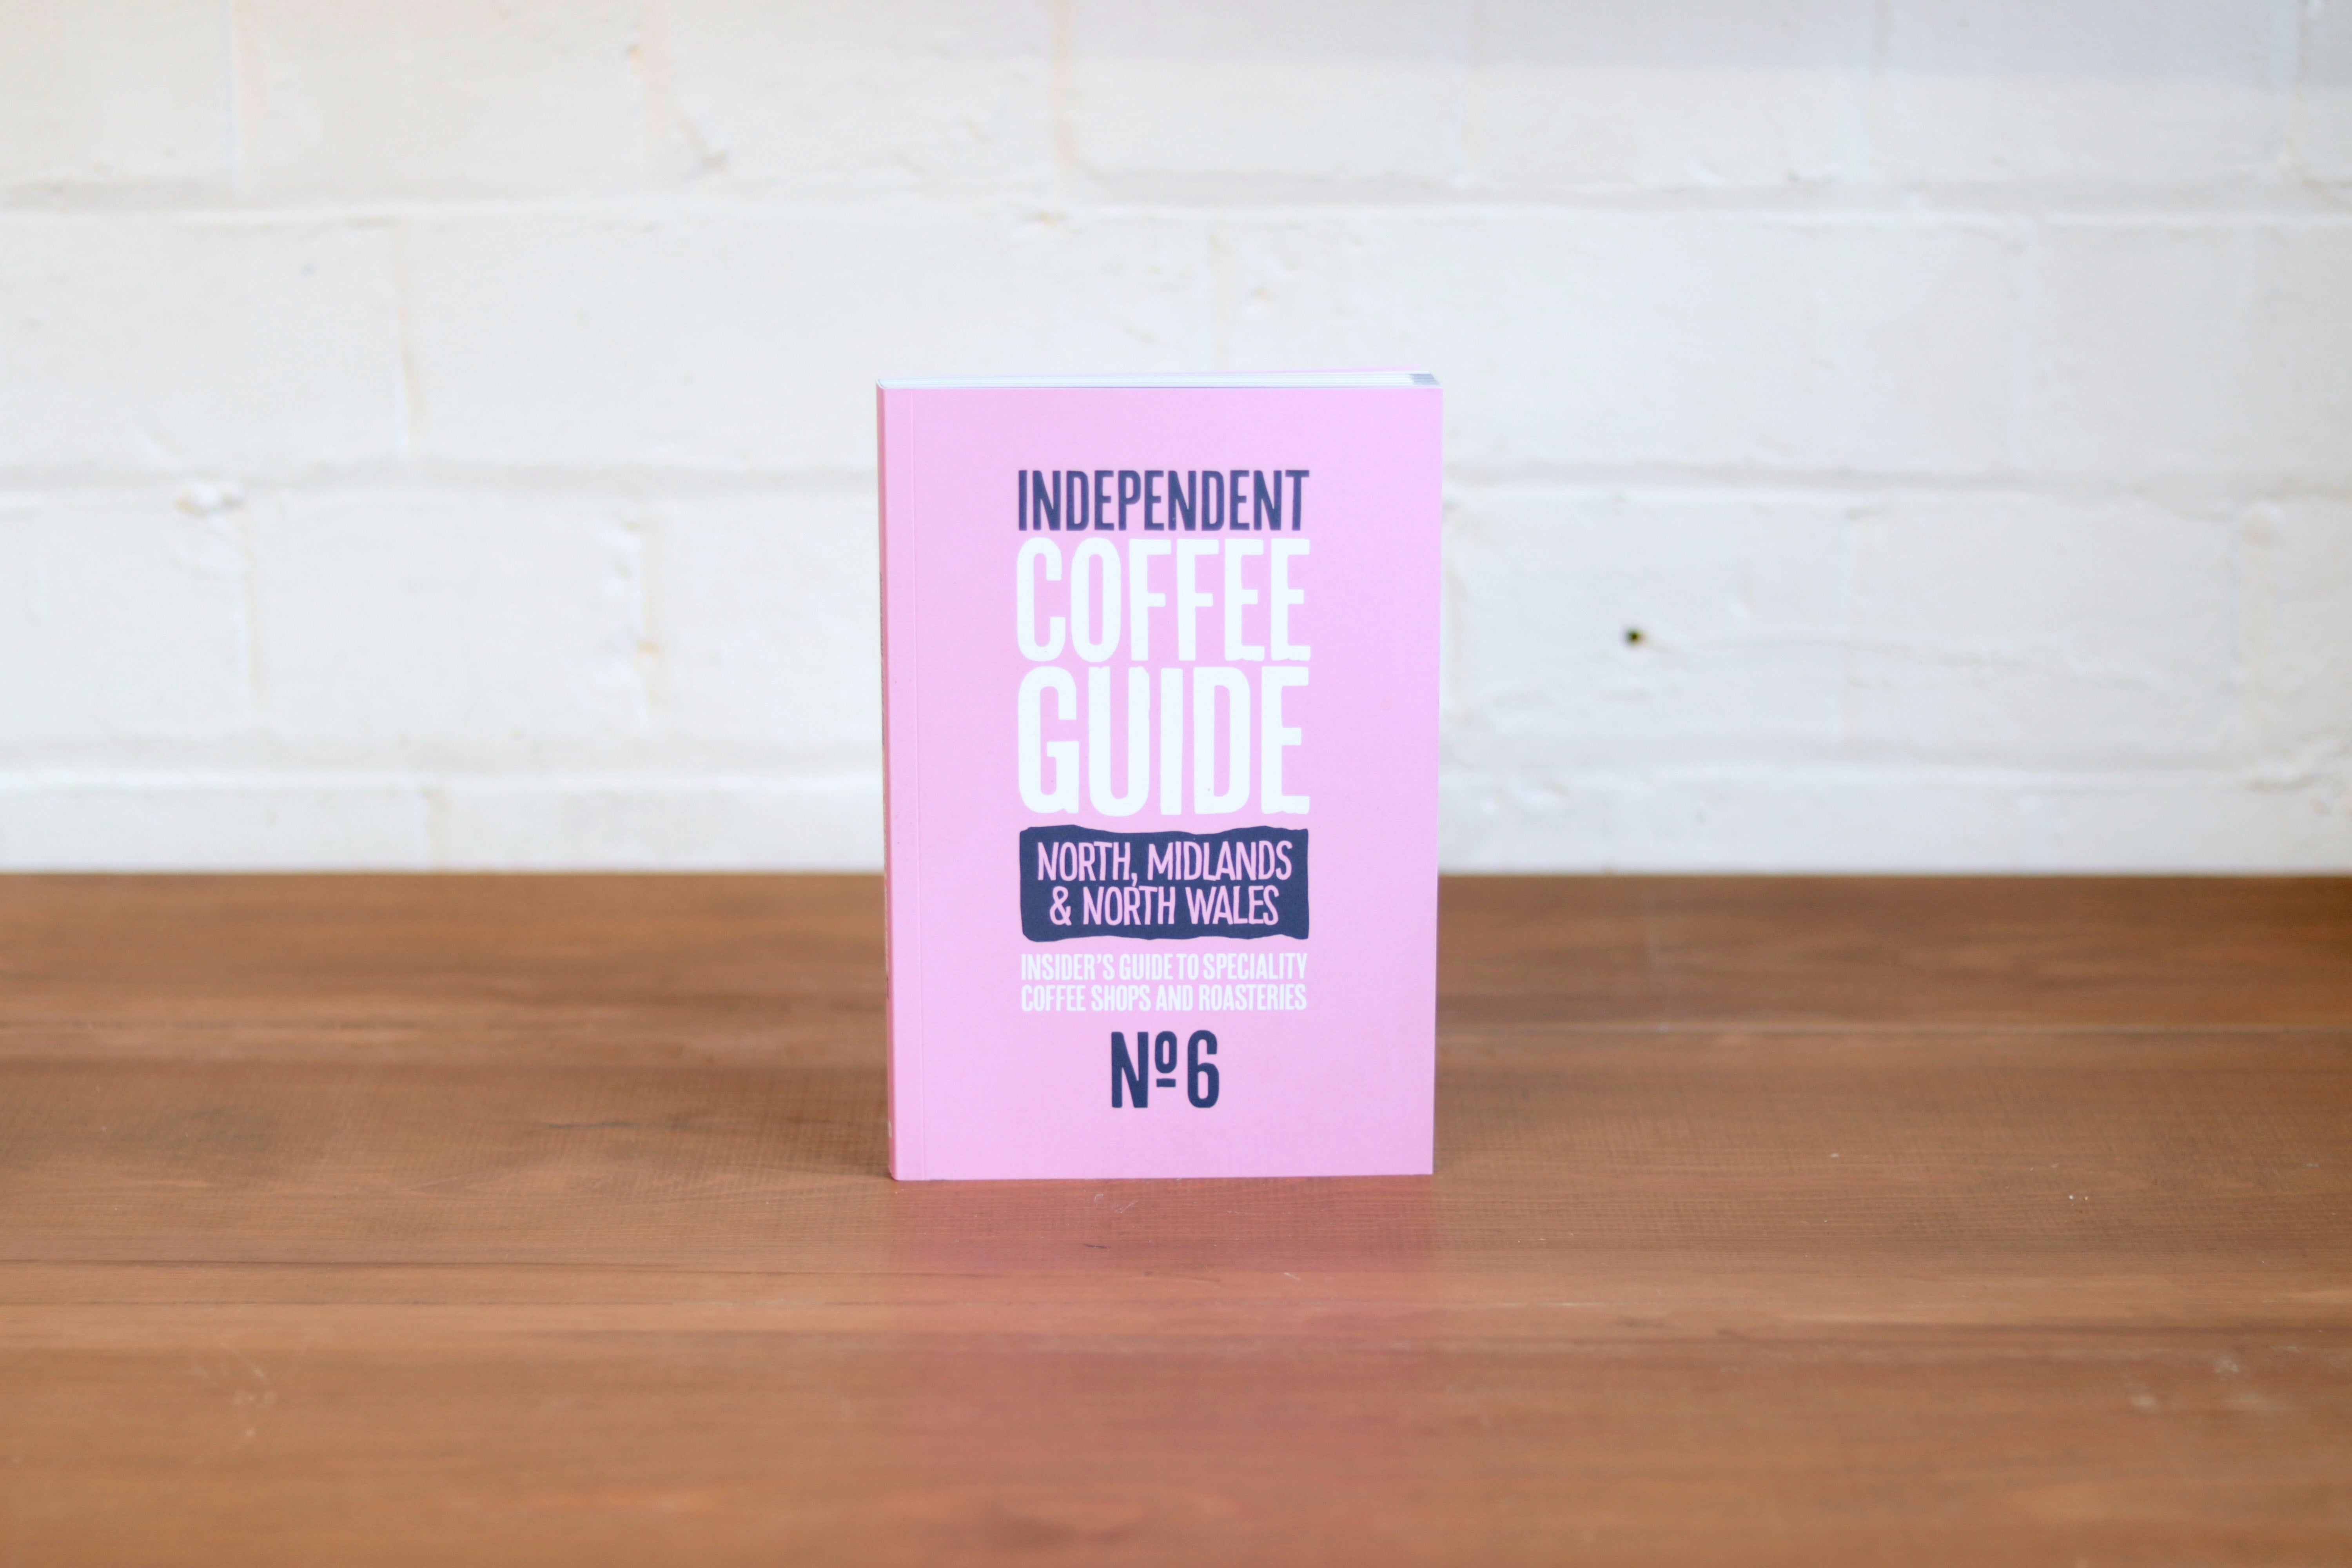 Independent Coffee Guide North, Midlands & North Wales No.6